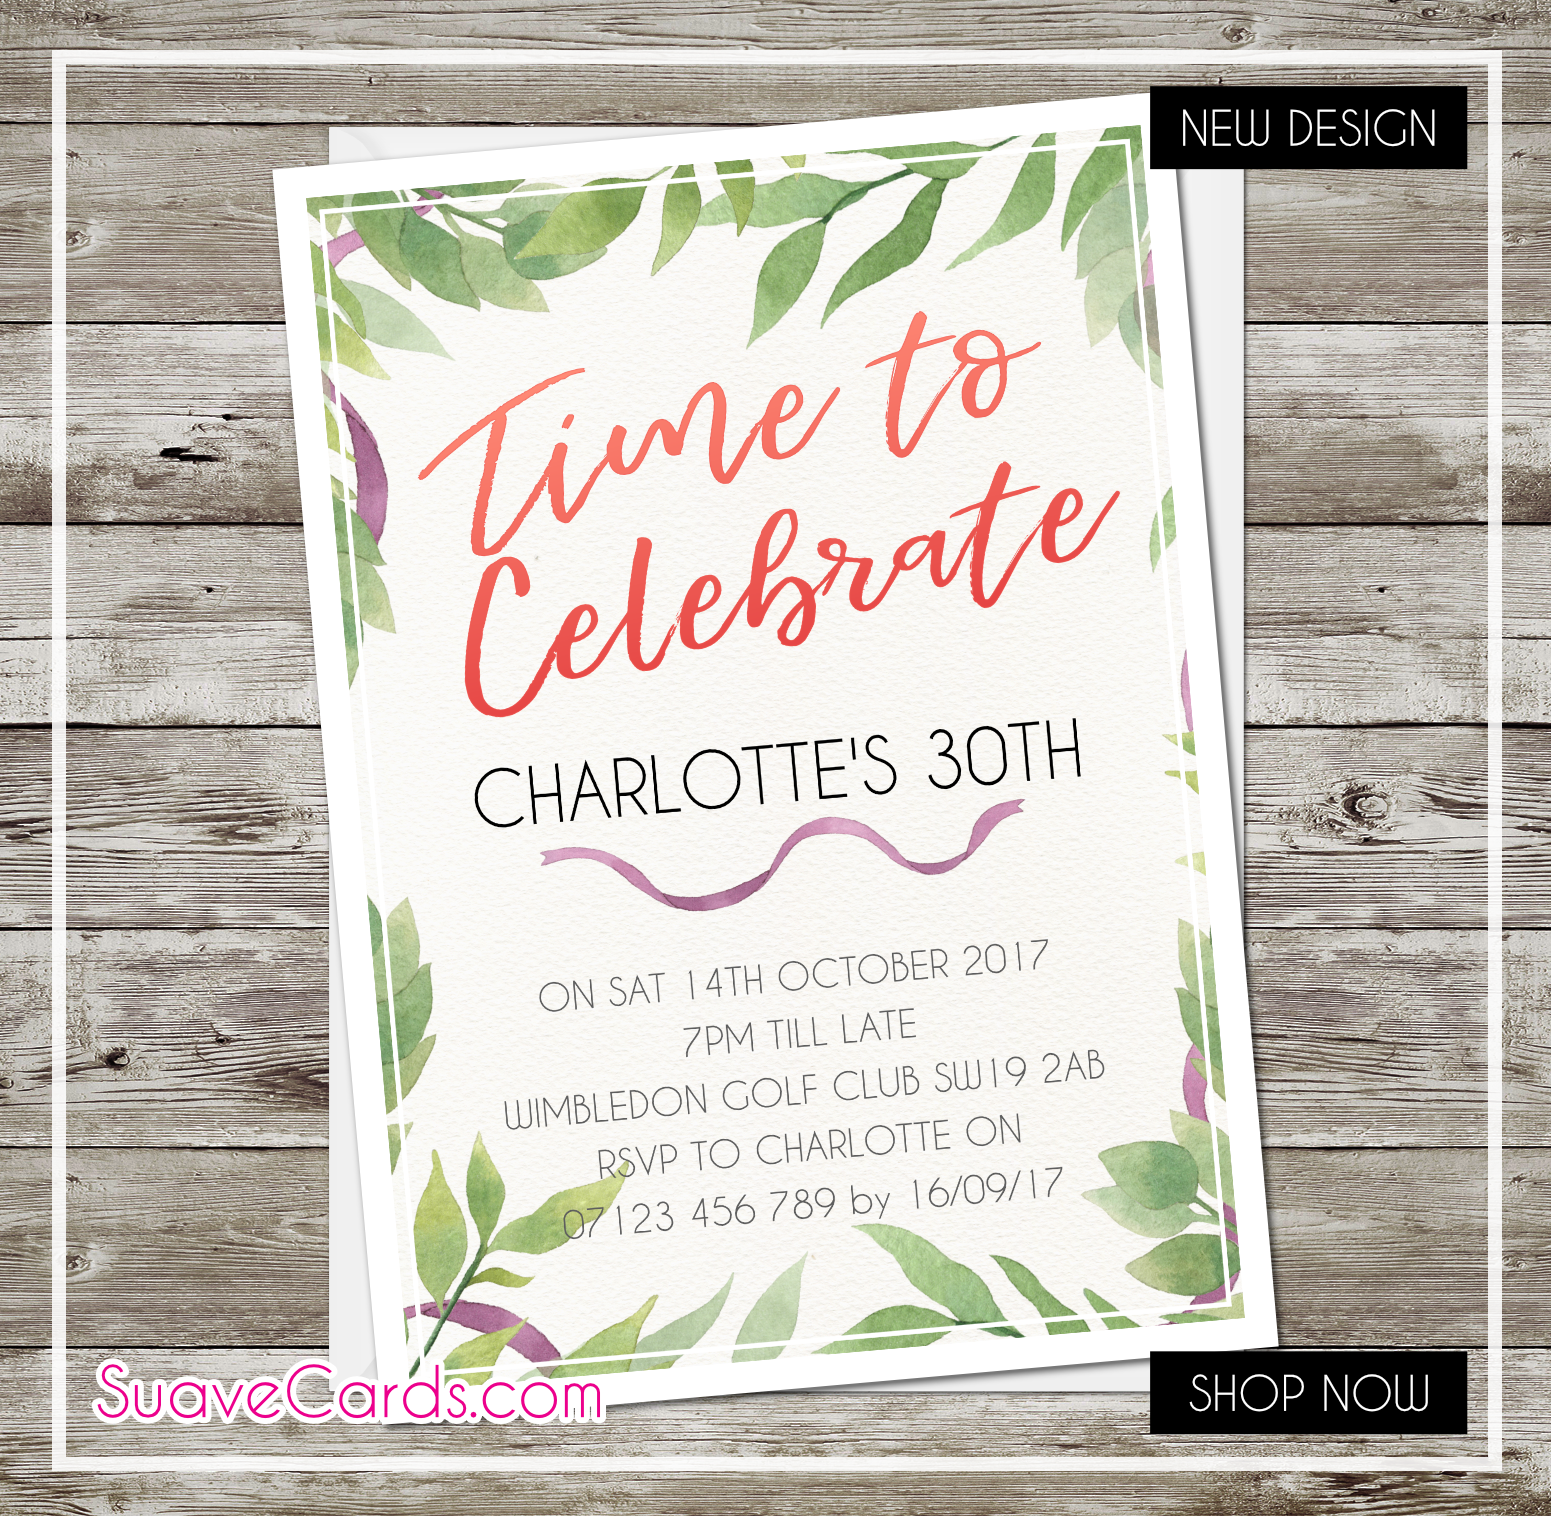 Celebrate (Time to celebrate – Green Leaves)